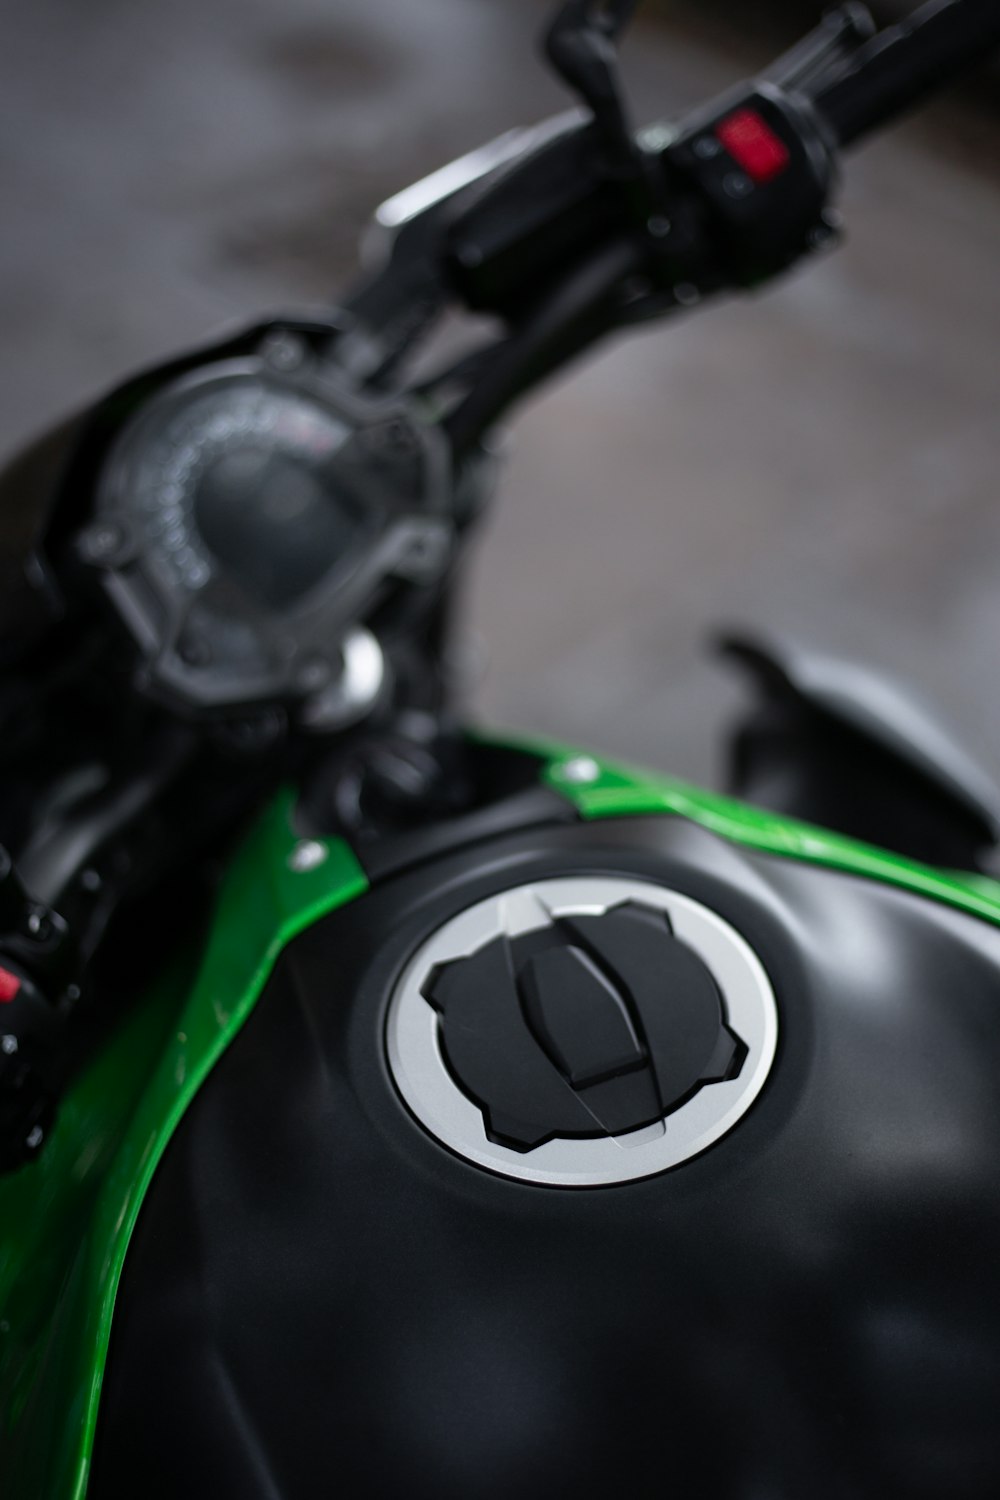 a close up of a green and black motorcycle